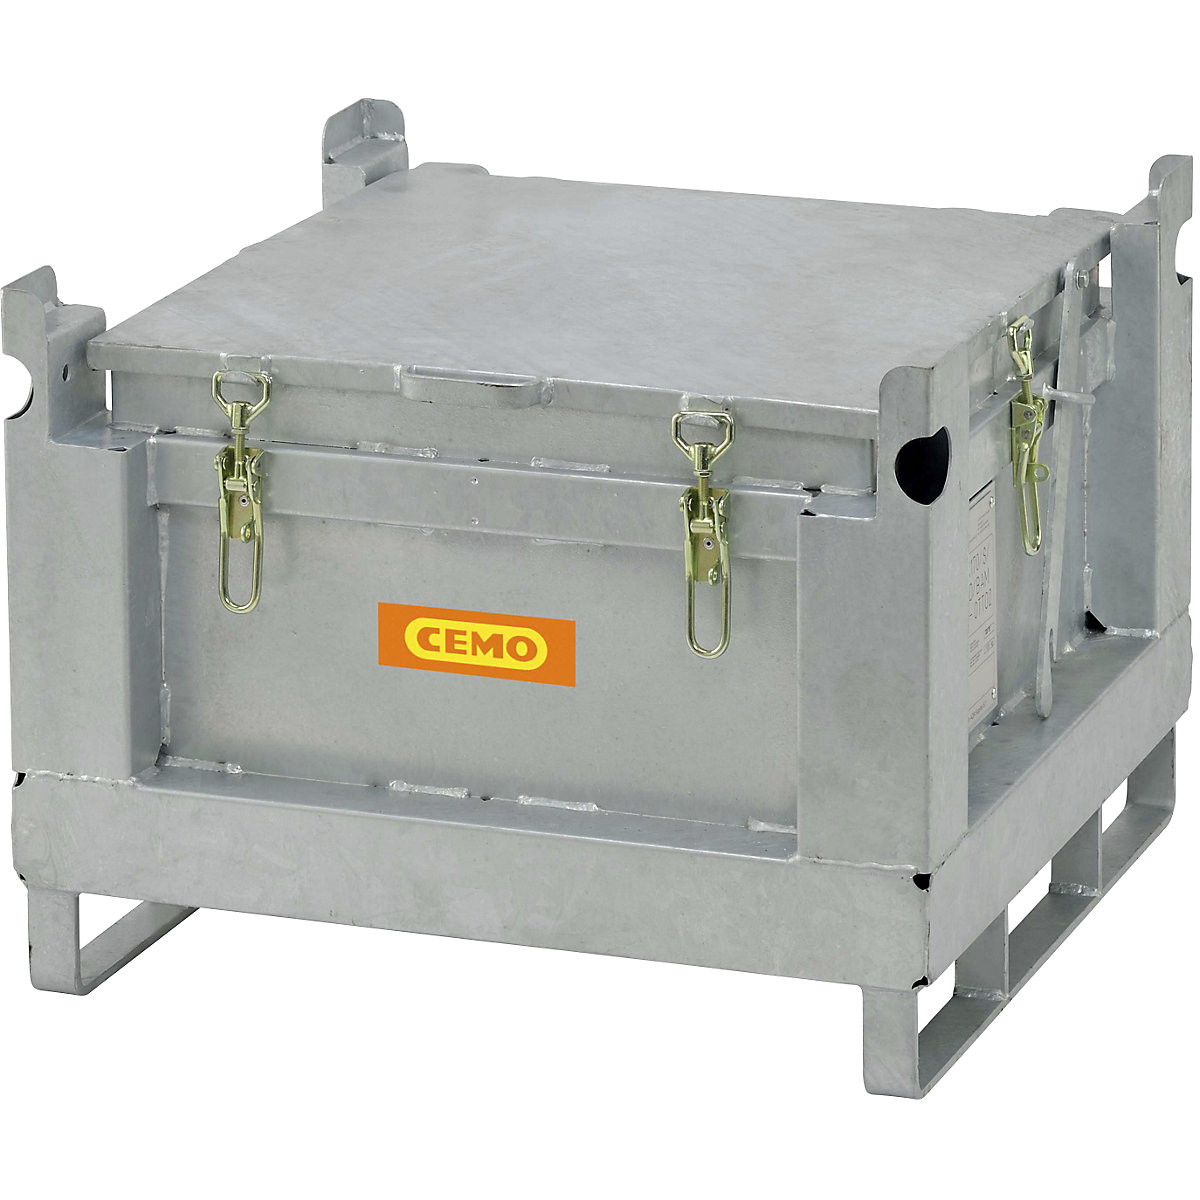 Steel collection and transport container for rechargeable batteries - CEMO